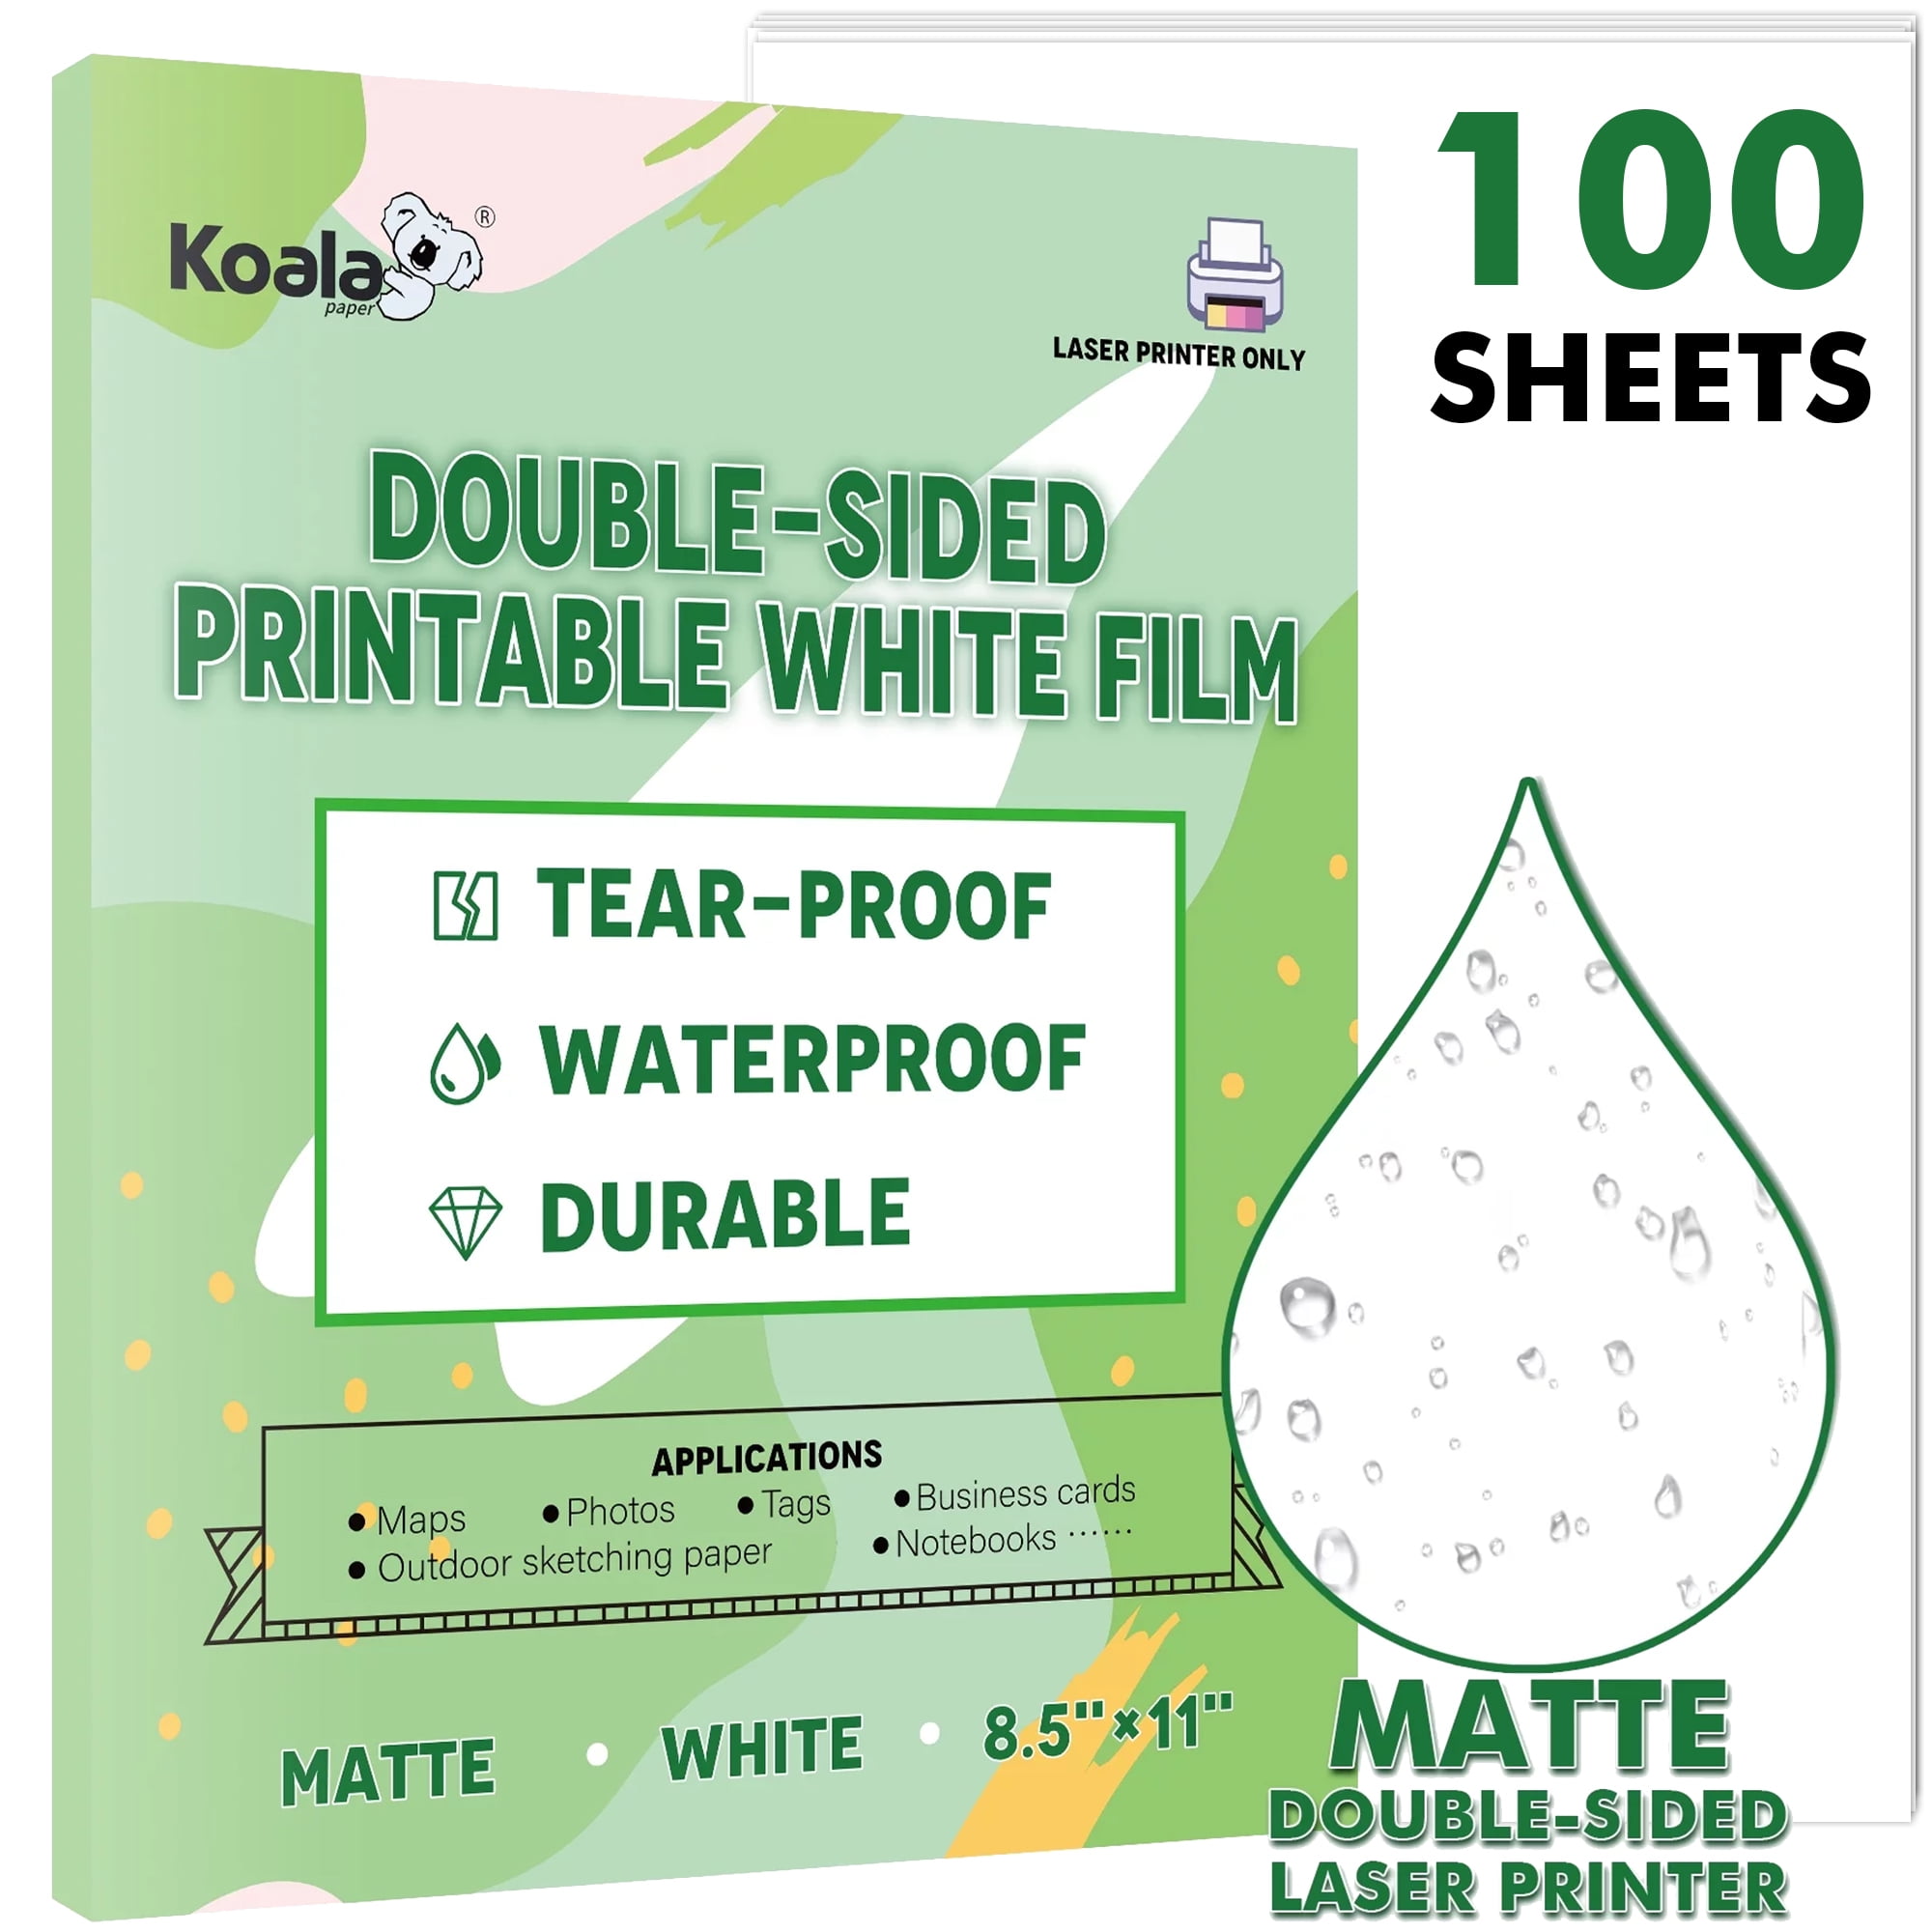 Koala Waterproof Paper for Laser Printer, Tear Proof Synthetic Paper, Matte Double Sided Printable White Film 8.5x11 in 25 Sheets for Printing